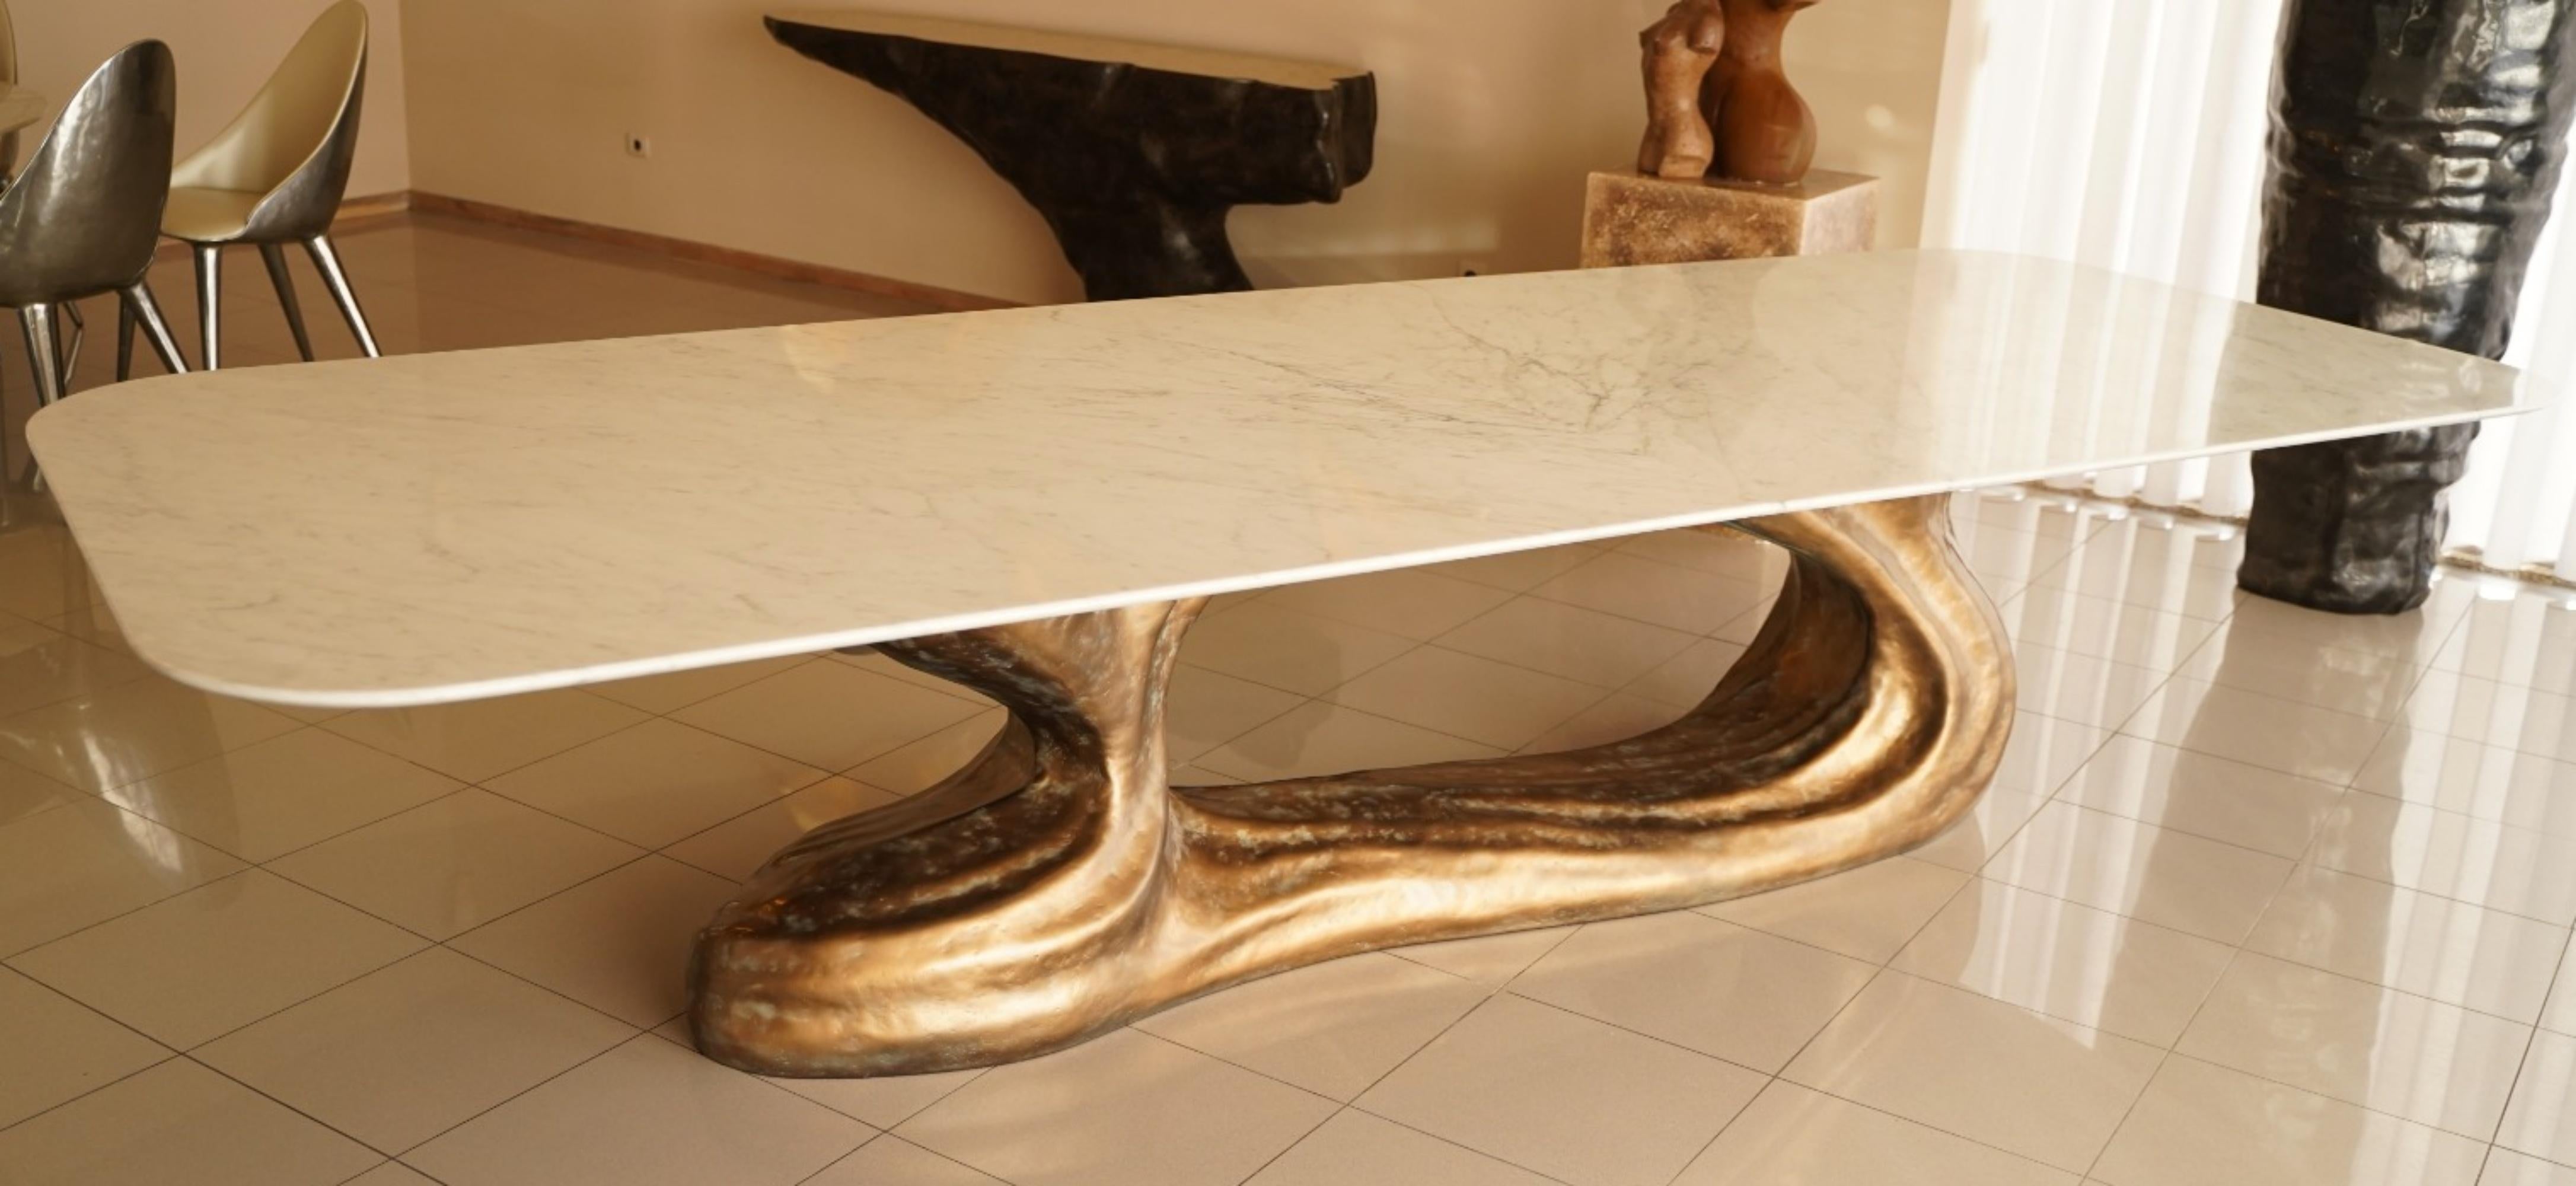 Hand-Crafted New Design Dining Table in Arabescato Marble 10/12 Persons Ready Delivery Now For Sale